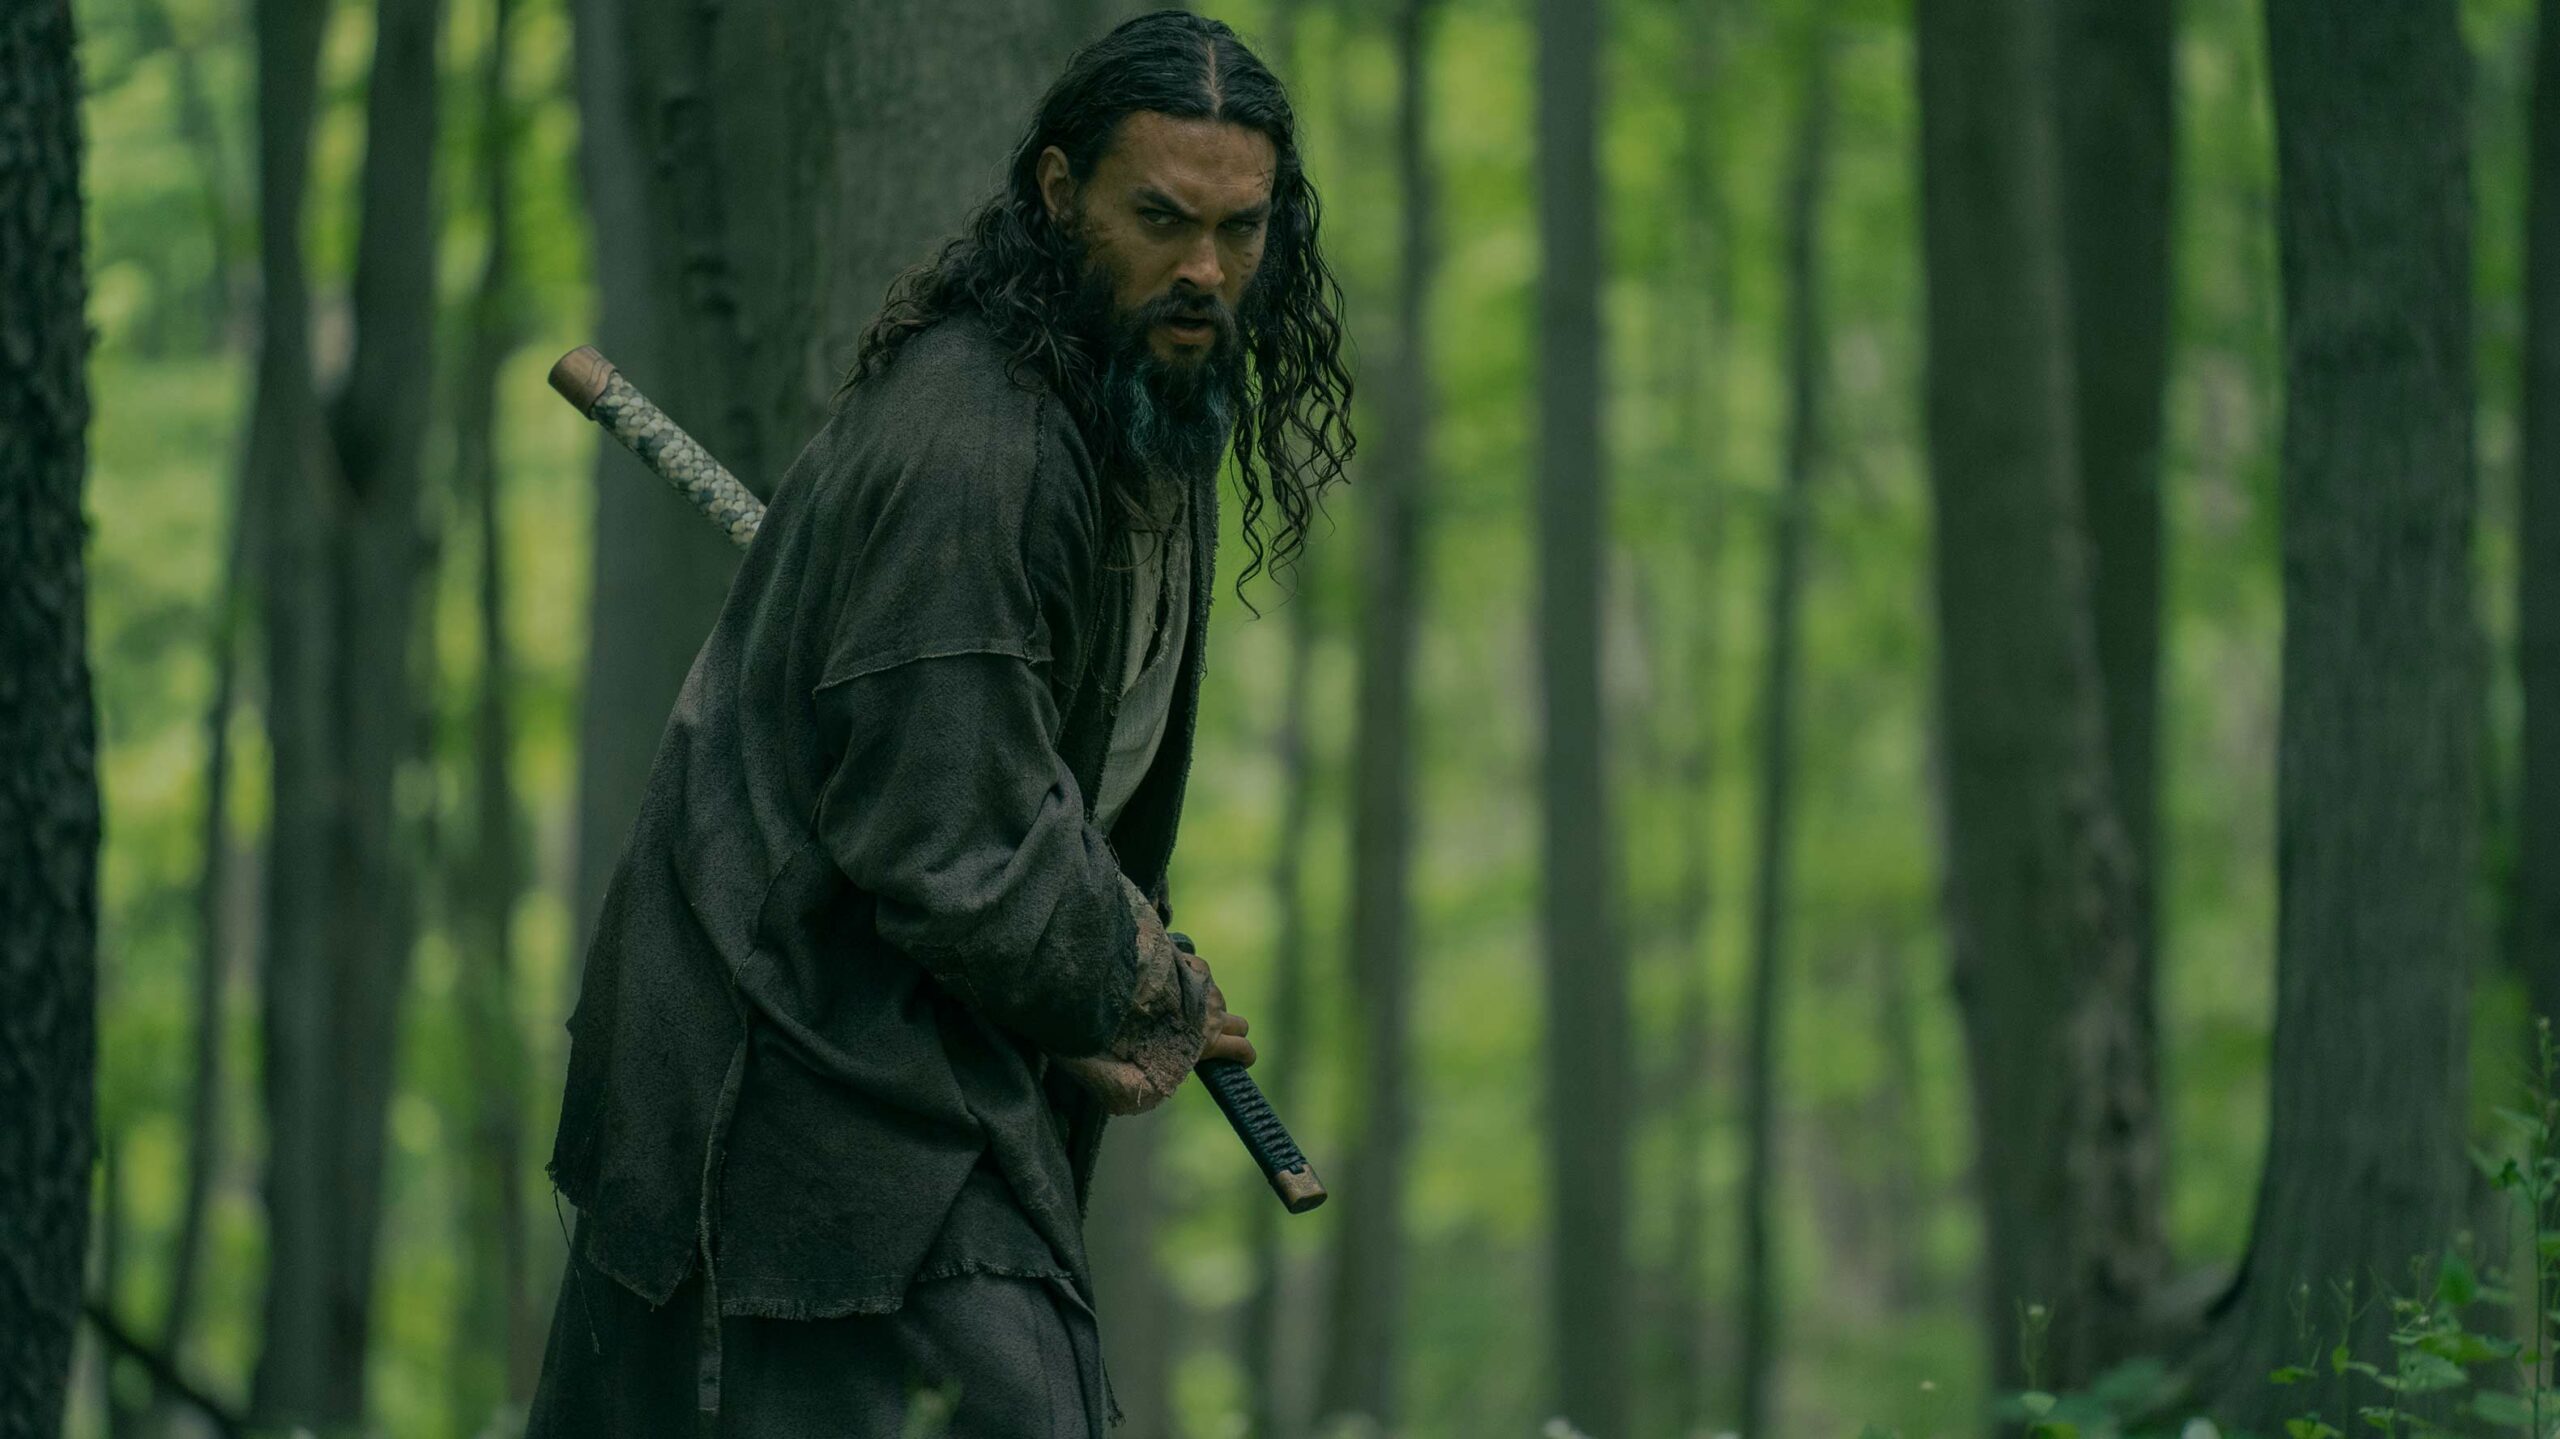 See Season 3 -- Jason Momoa is in a forest with a sword